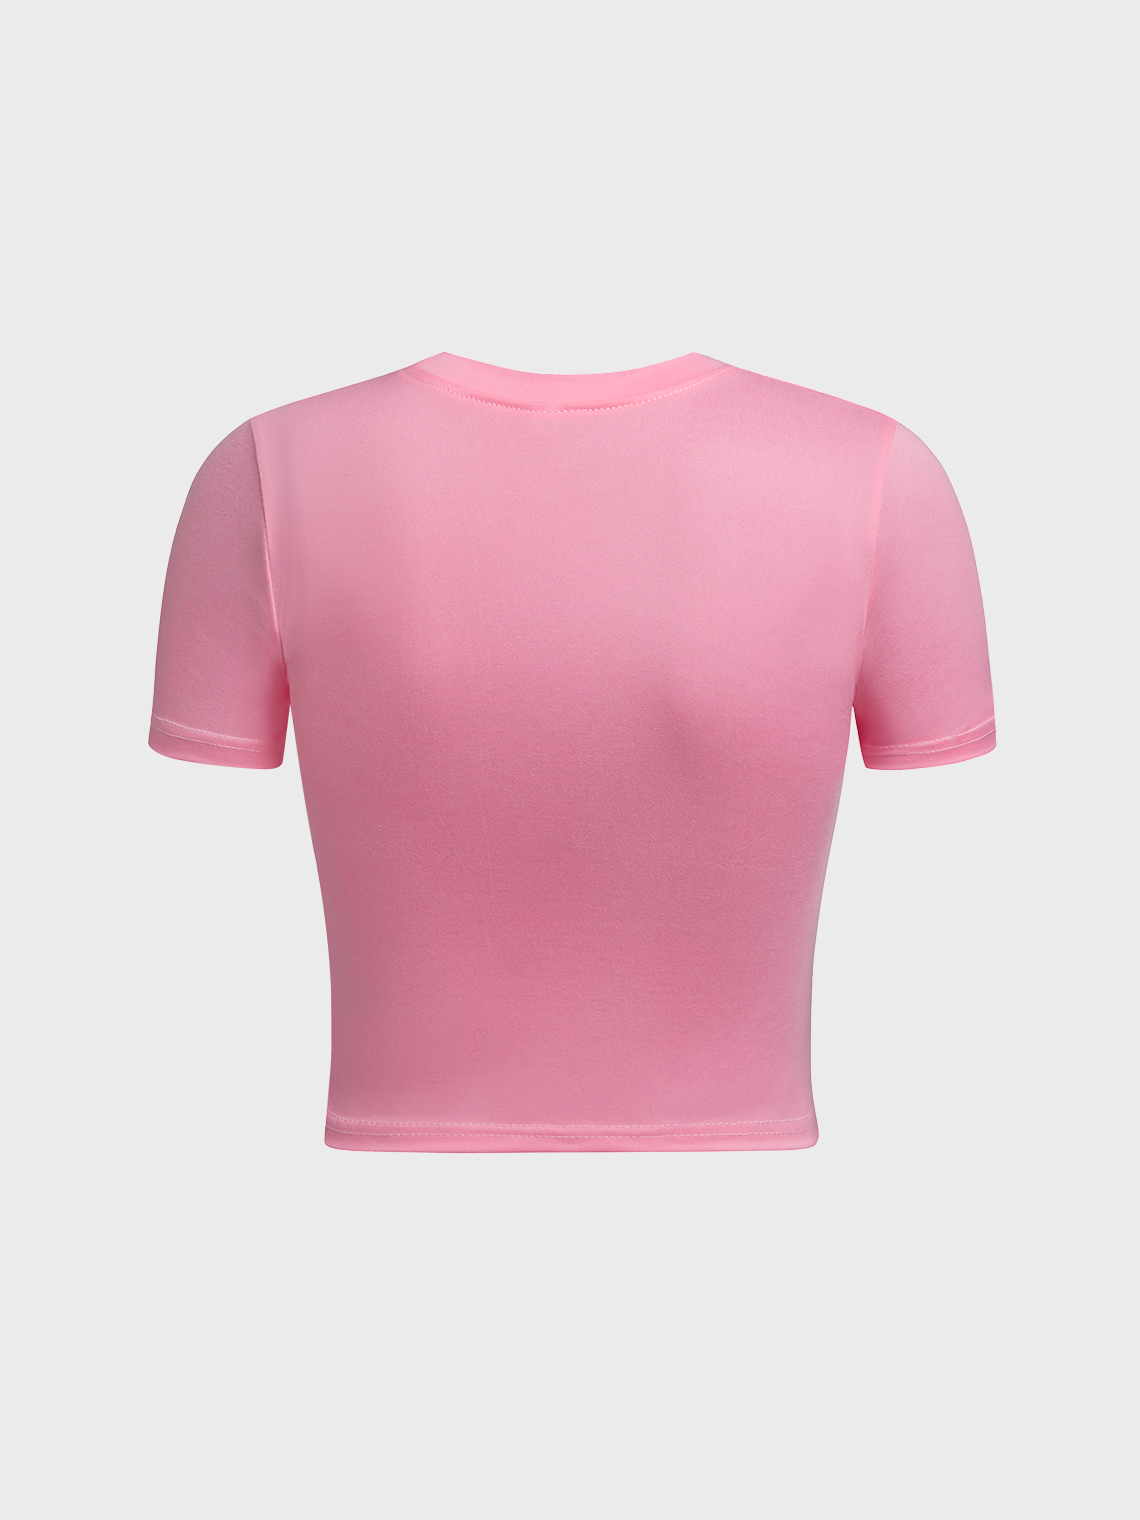 【Final Sale】Y2k Pink Graphic Basic Top T-Shirt